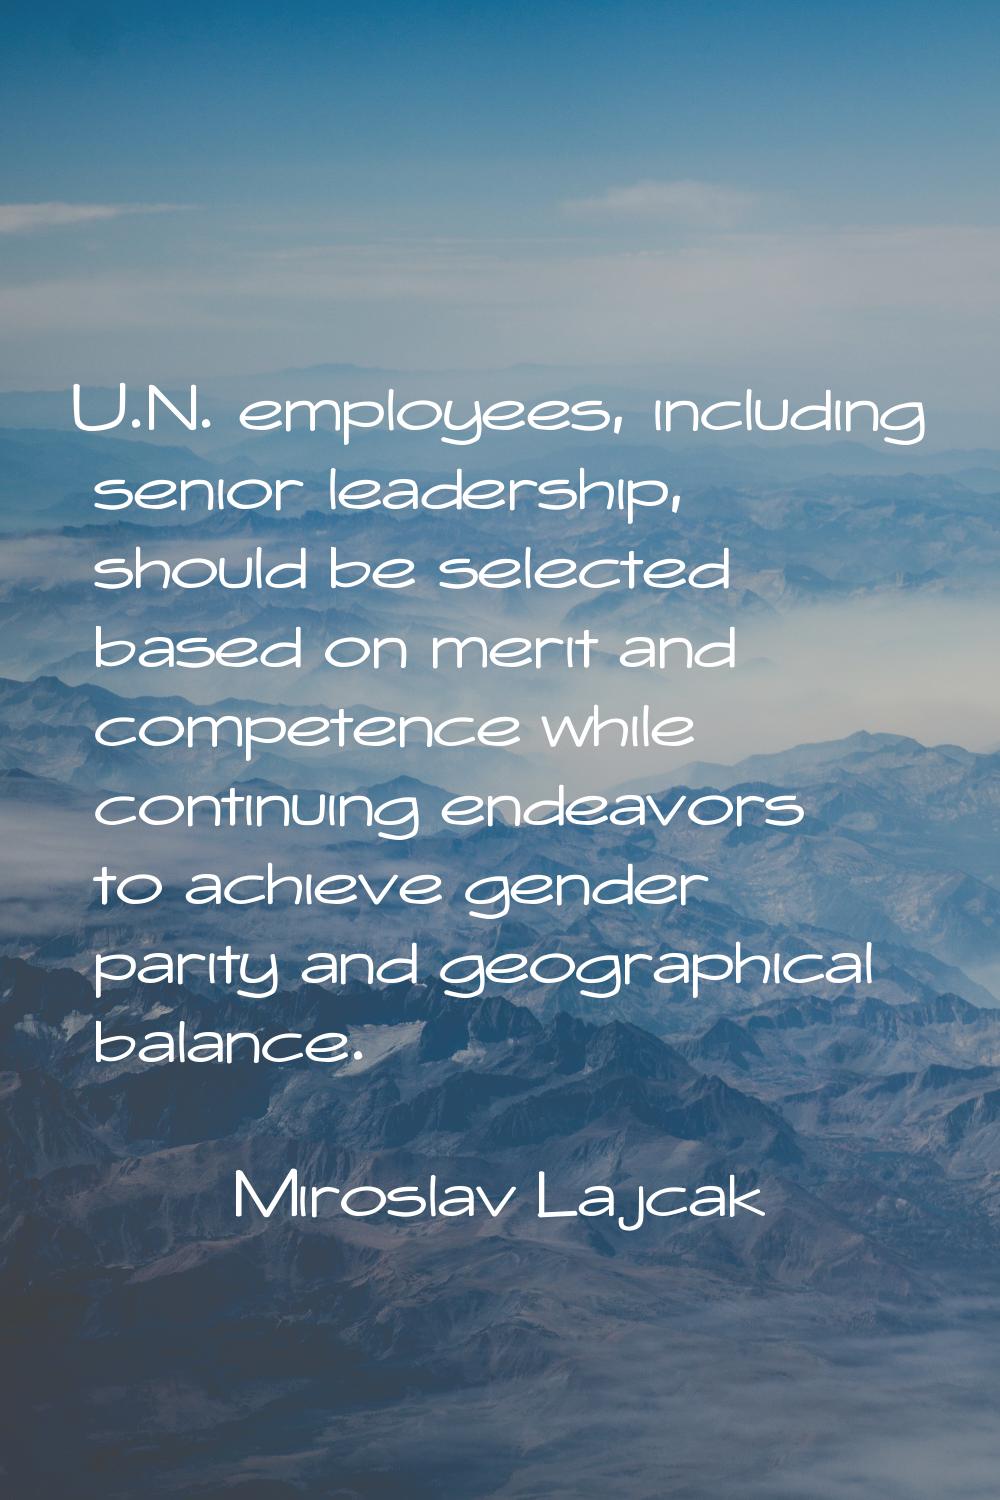 U.N. employees, including senior leadership, should be selected based on merit and competence while